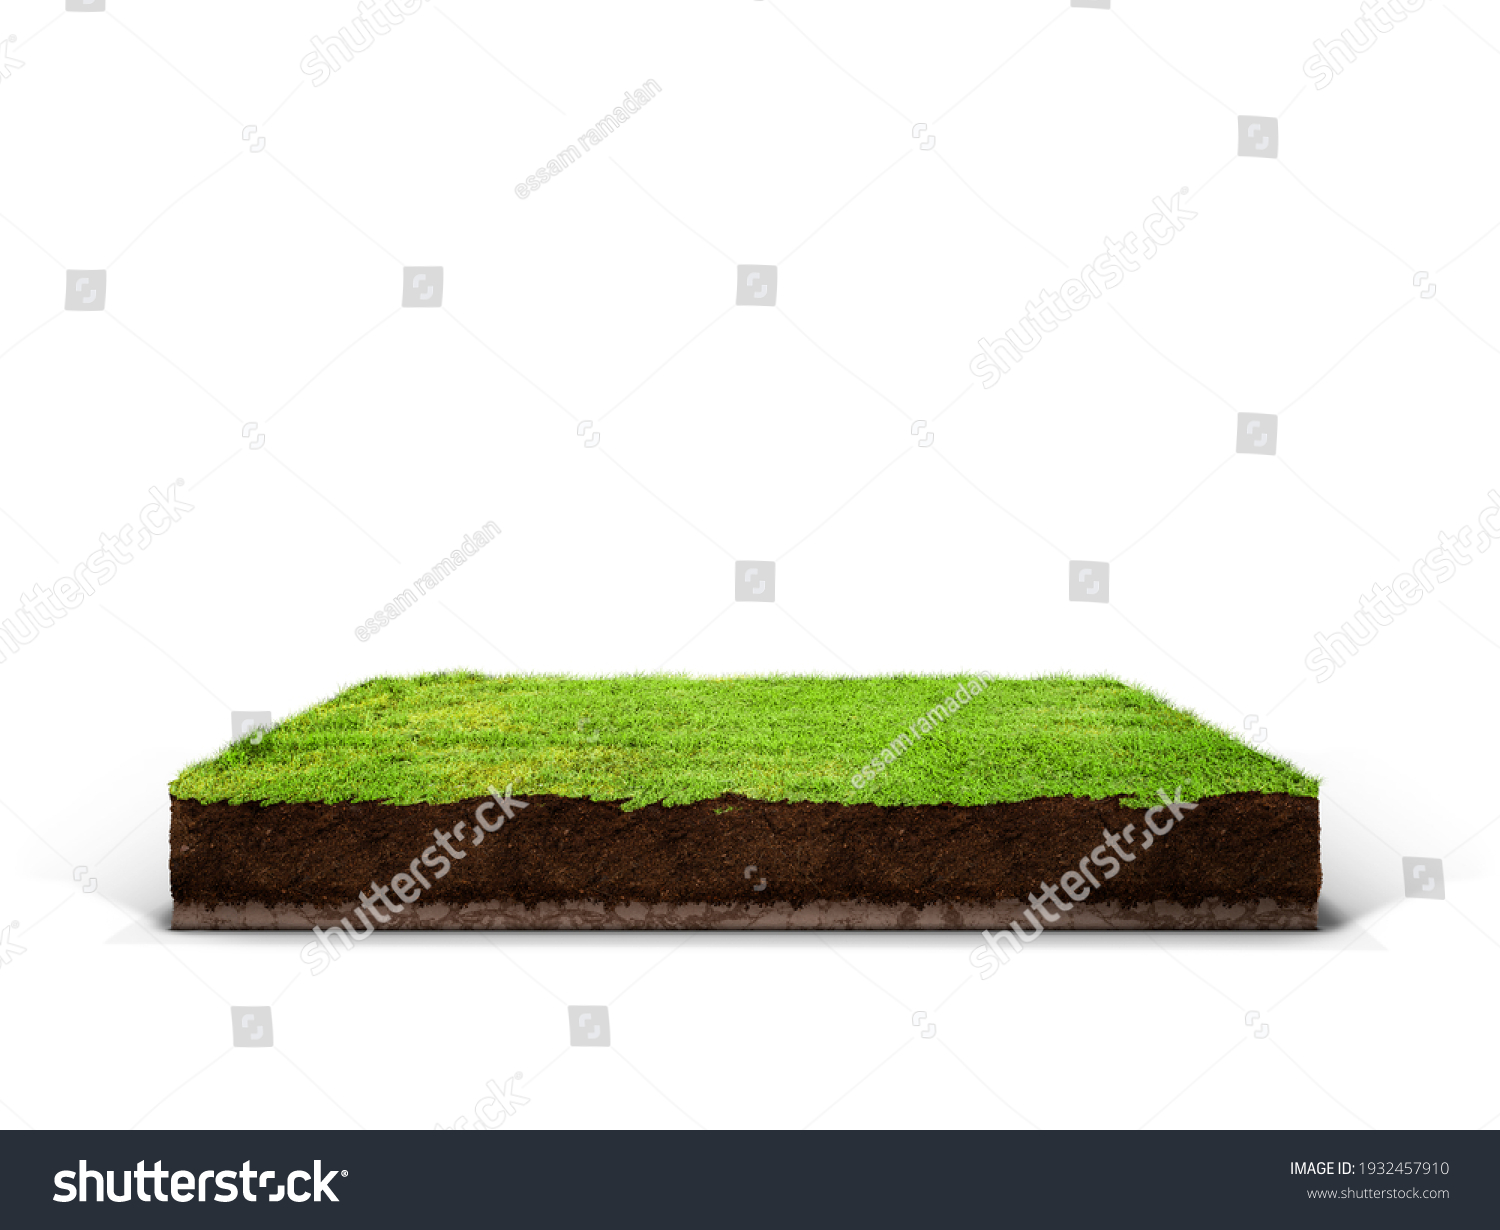 cubical cross section with underground earth soil and green grass on top, cutaway terrain surface with mud and field isolated #1932457910